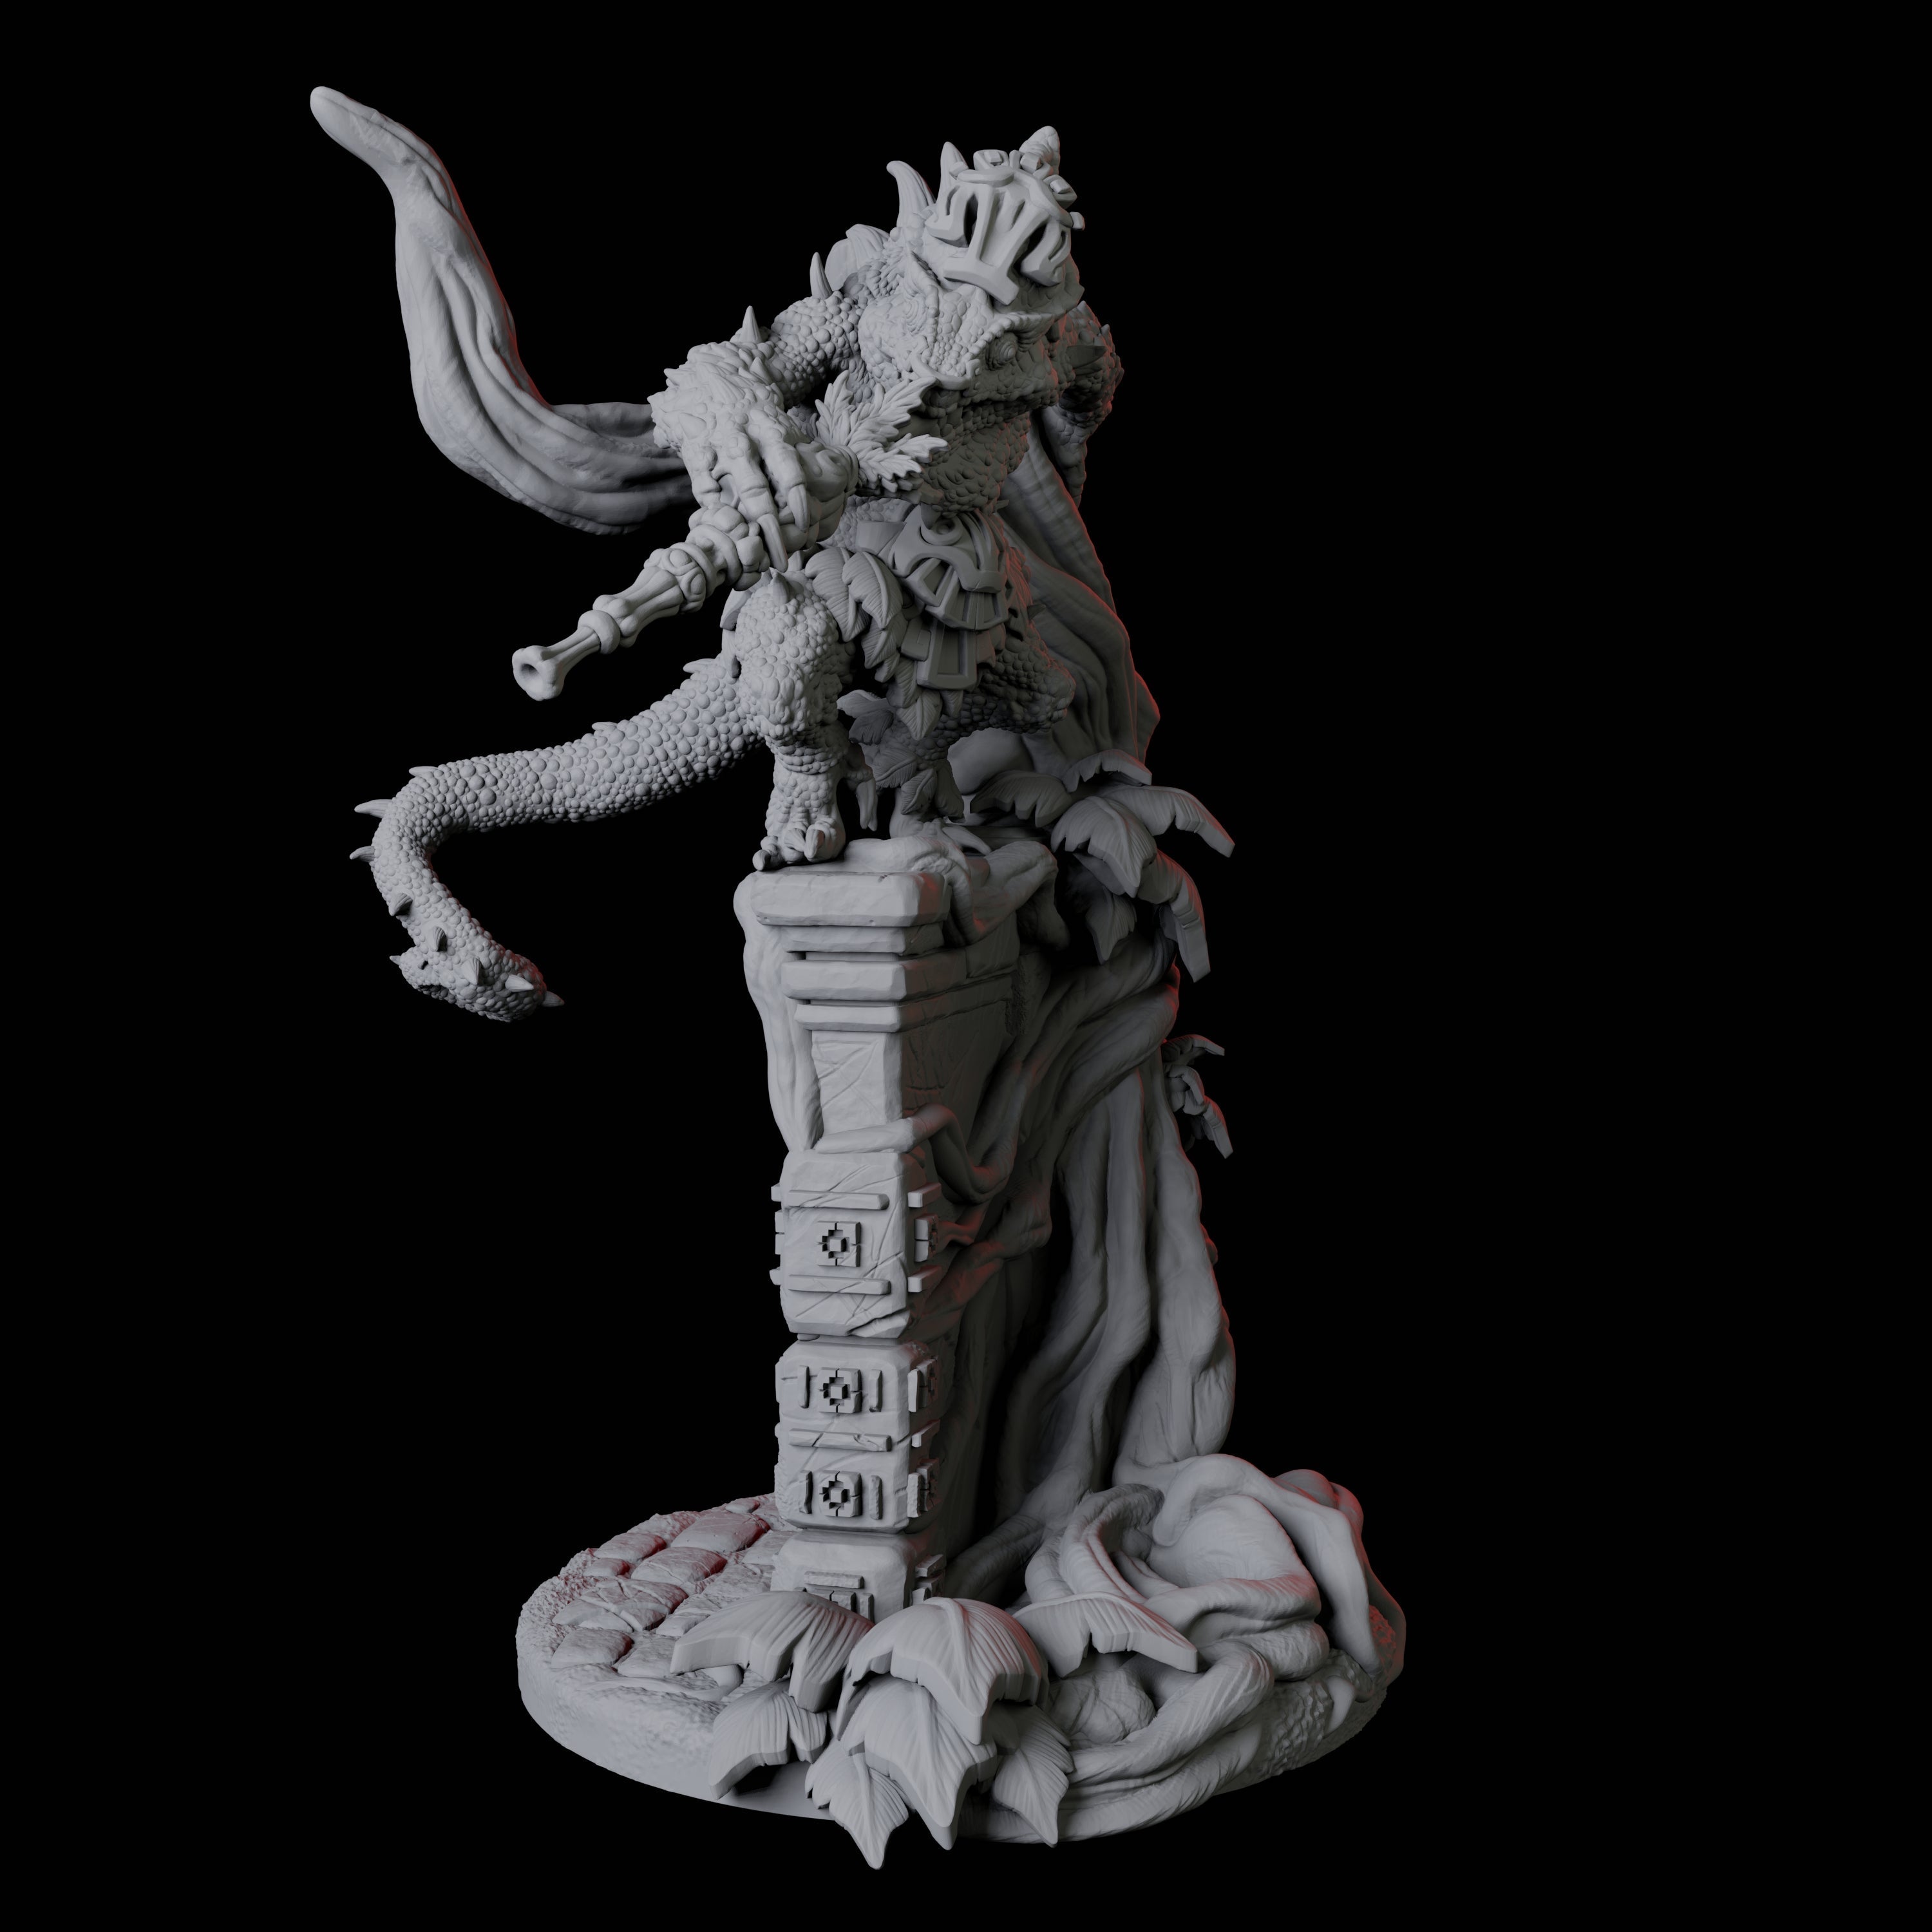 Grung Rogue C Miniature for Dungeons and Dragons, Pathfinder or other TTRPGs